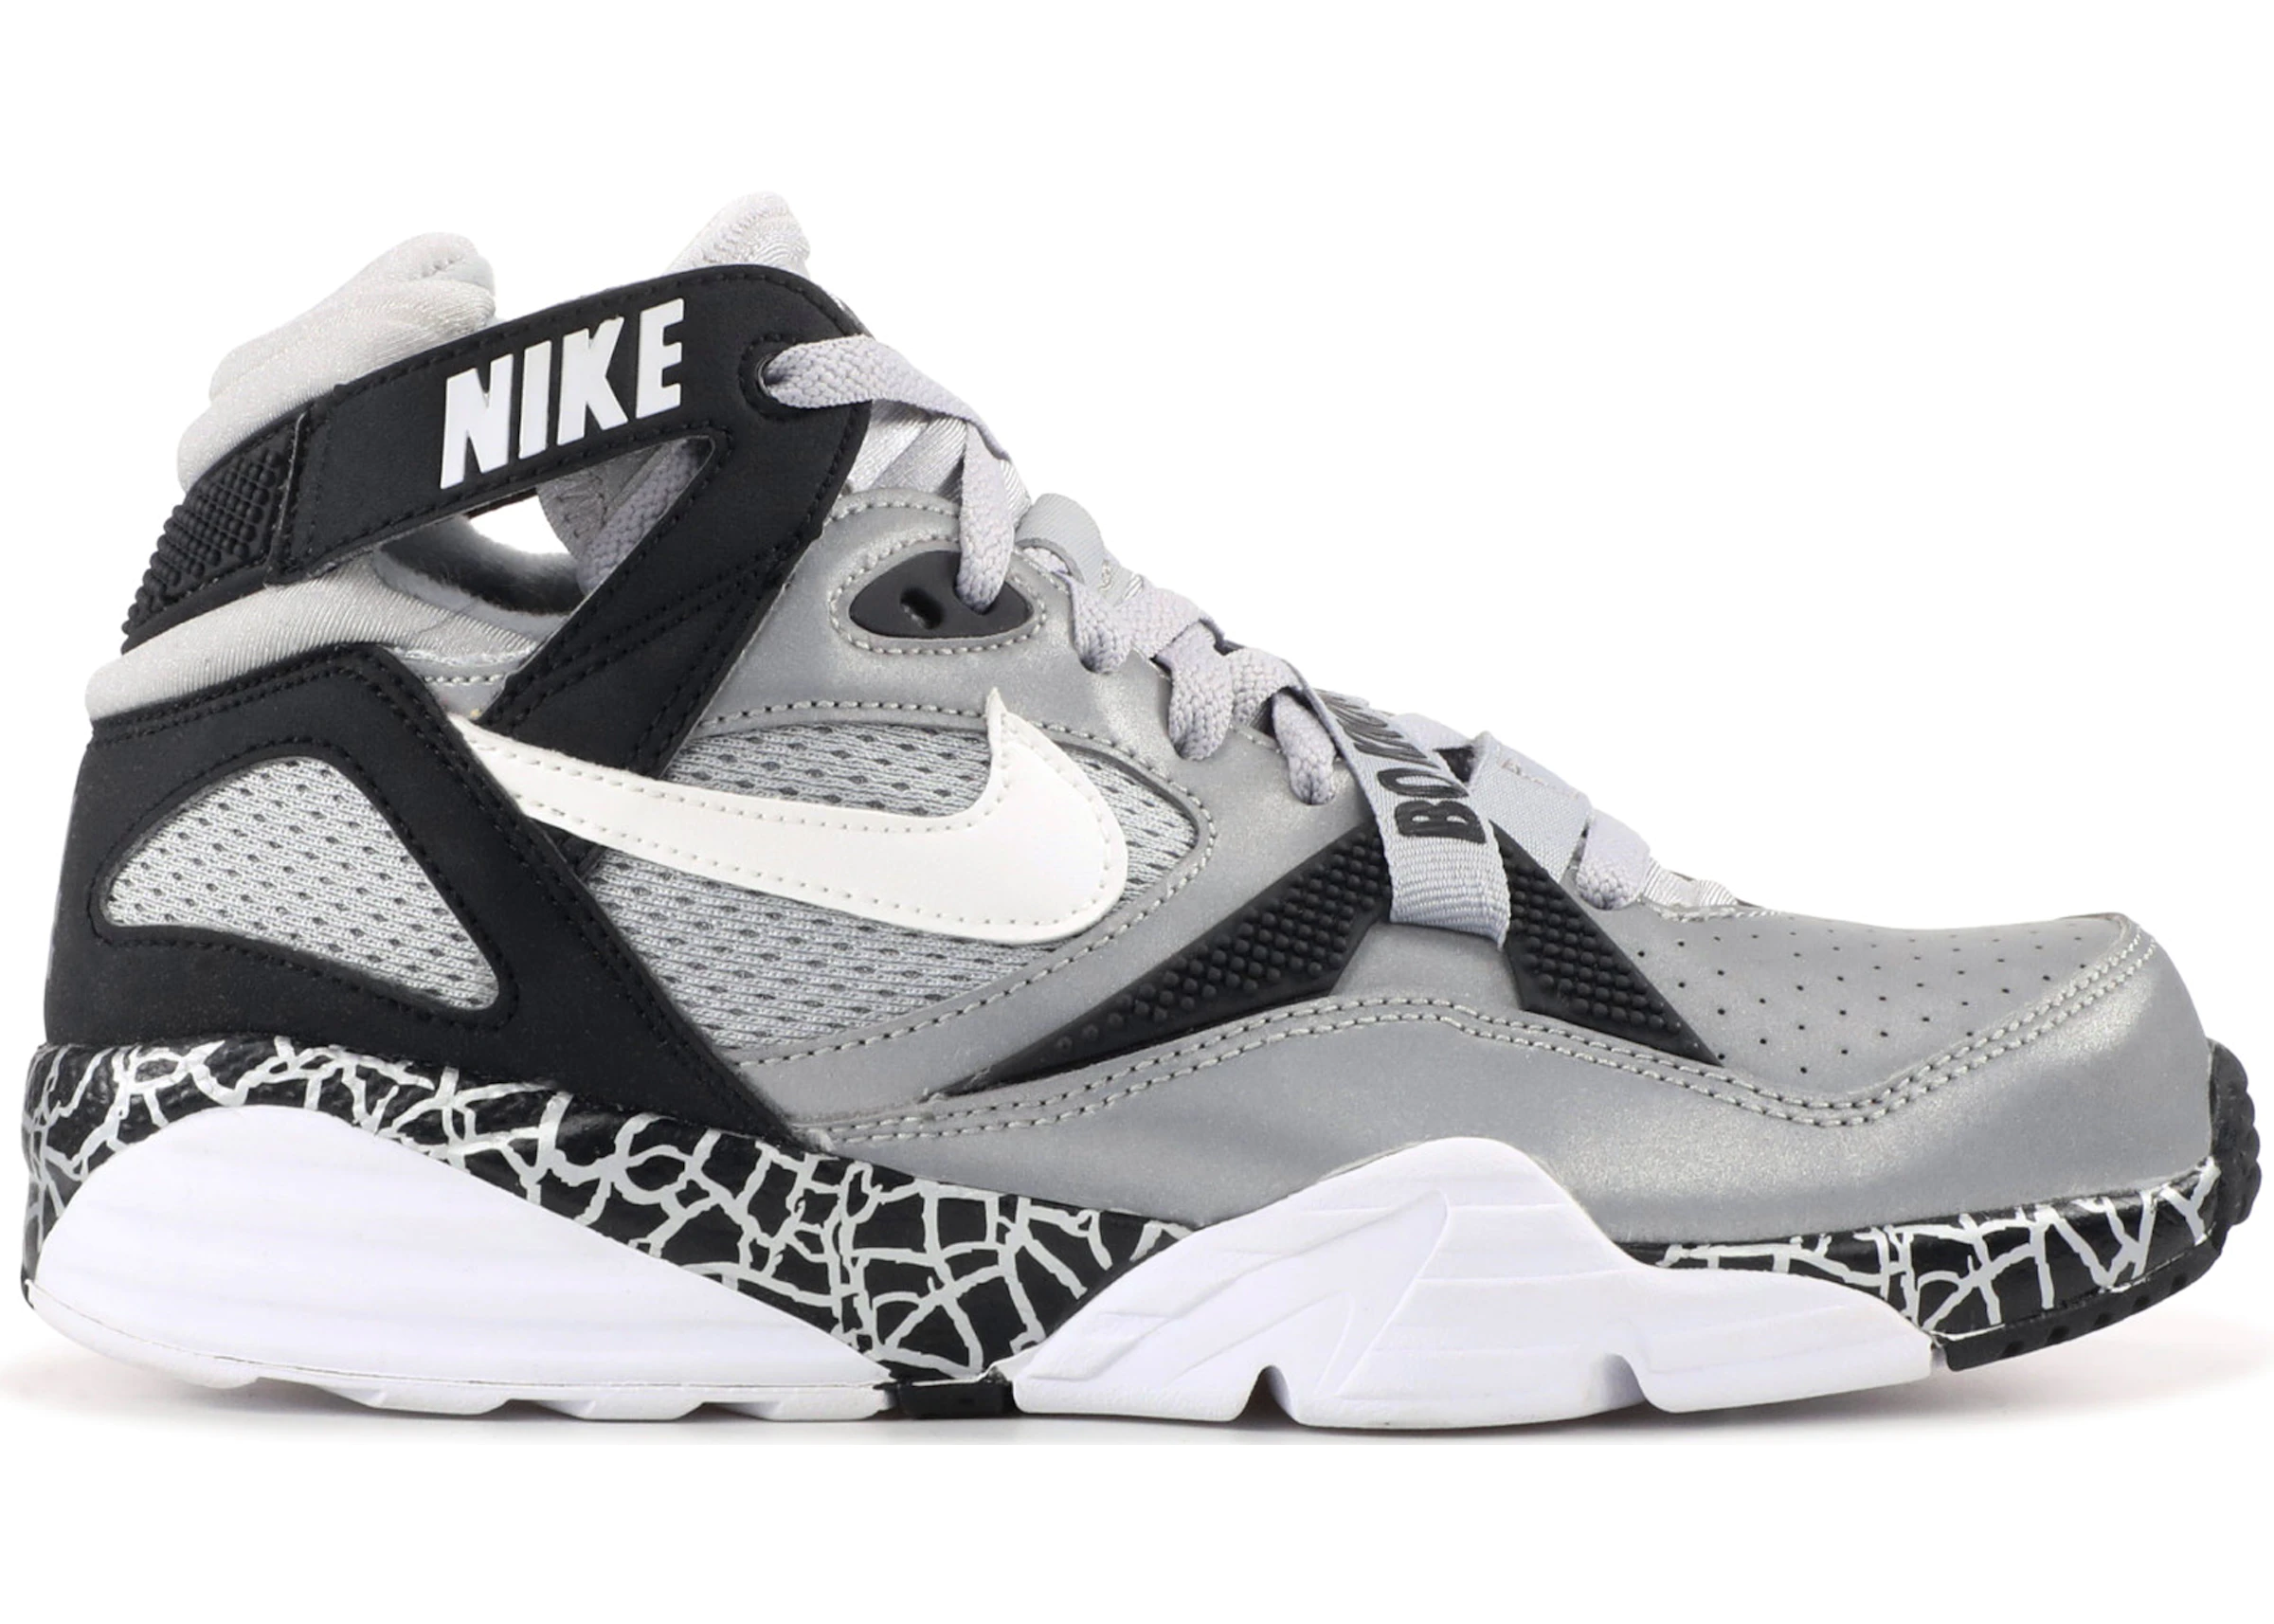 Foreman manager Suffocating Nike Air Trainer Max 91 Bo Knows Raiders - 615147-001 - US